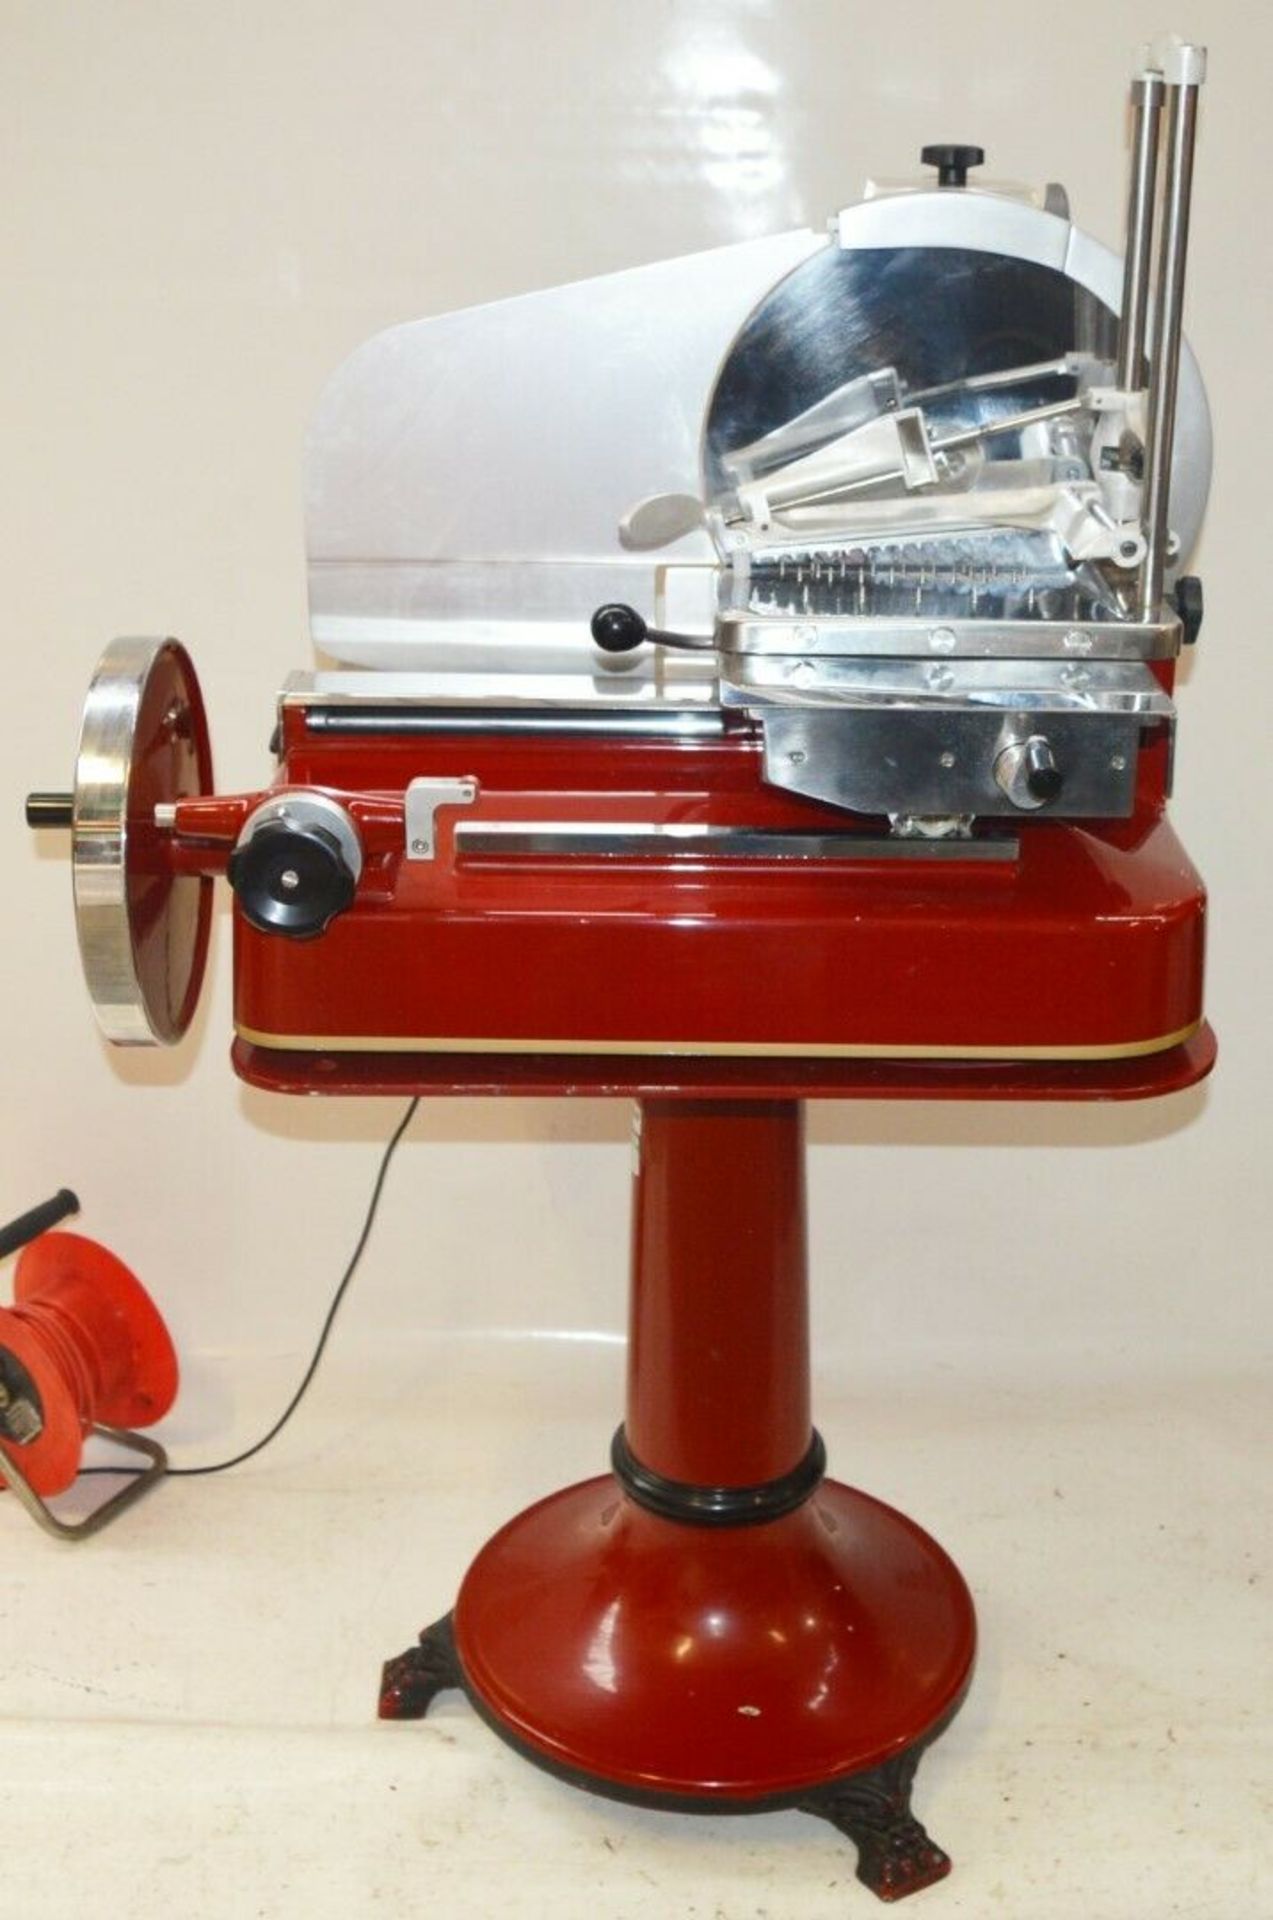 1 x Noaw 370mm Flywheel Meat / Prosciutto Slicer - Model 370/81CE220 - Ex M&S Made in Italy -